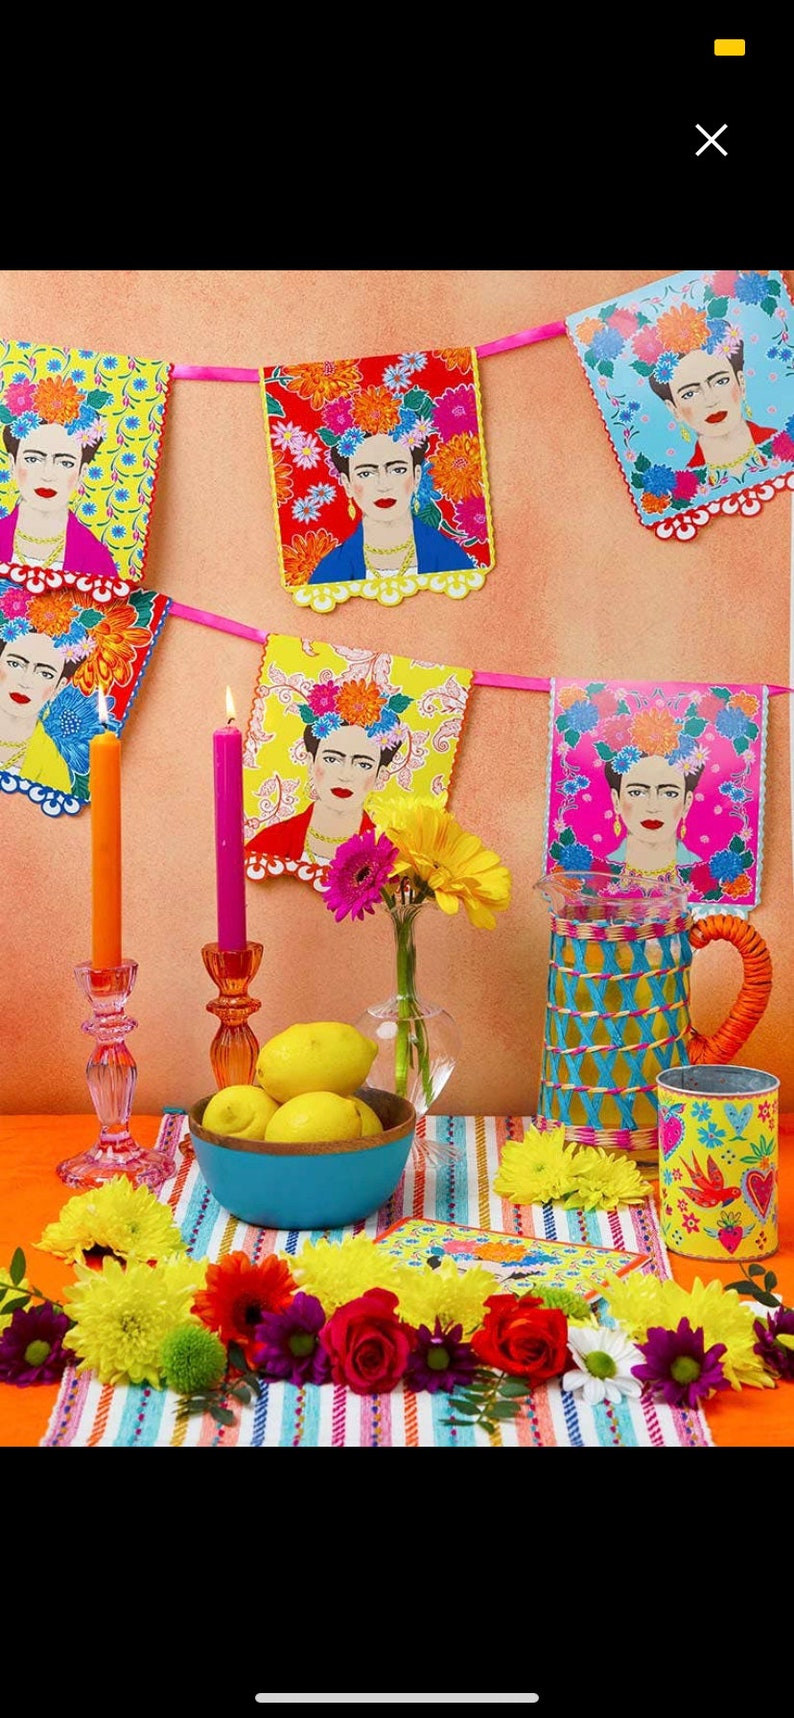 Frida Party, Frida Banner, Fiesta Party, Fiesta Decorations, Mexican Party Decorations, Birthday Decor, Fiesta Baby Shower image 1